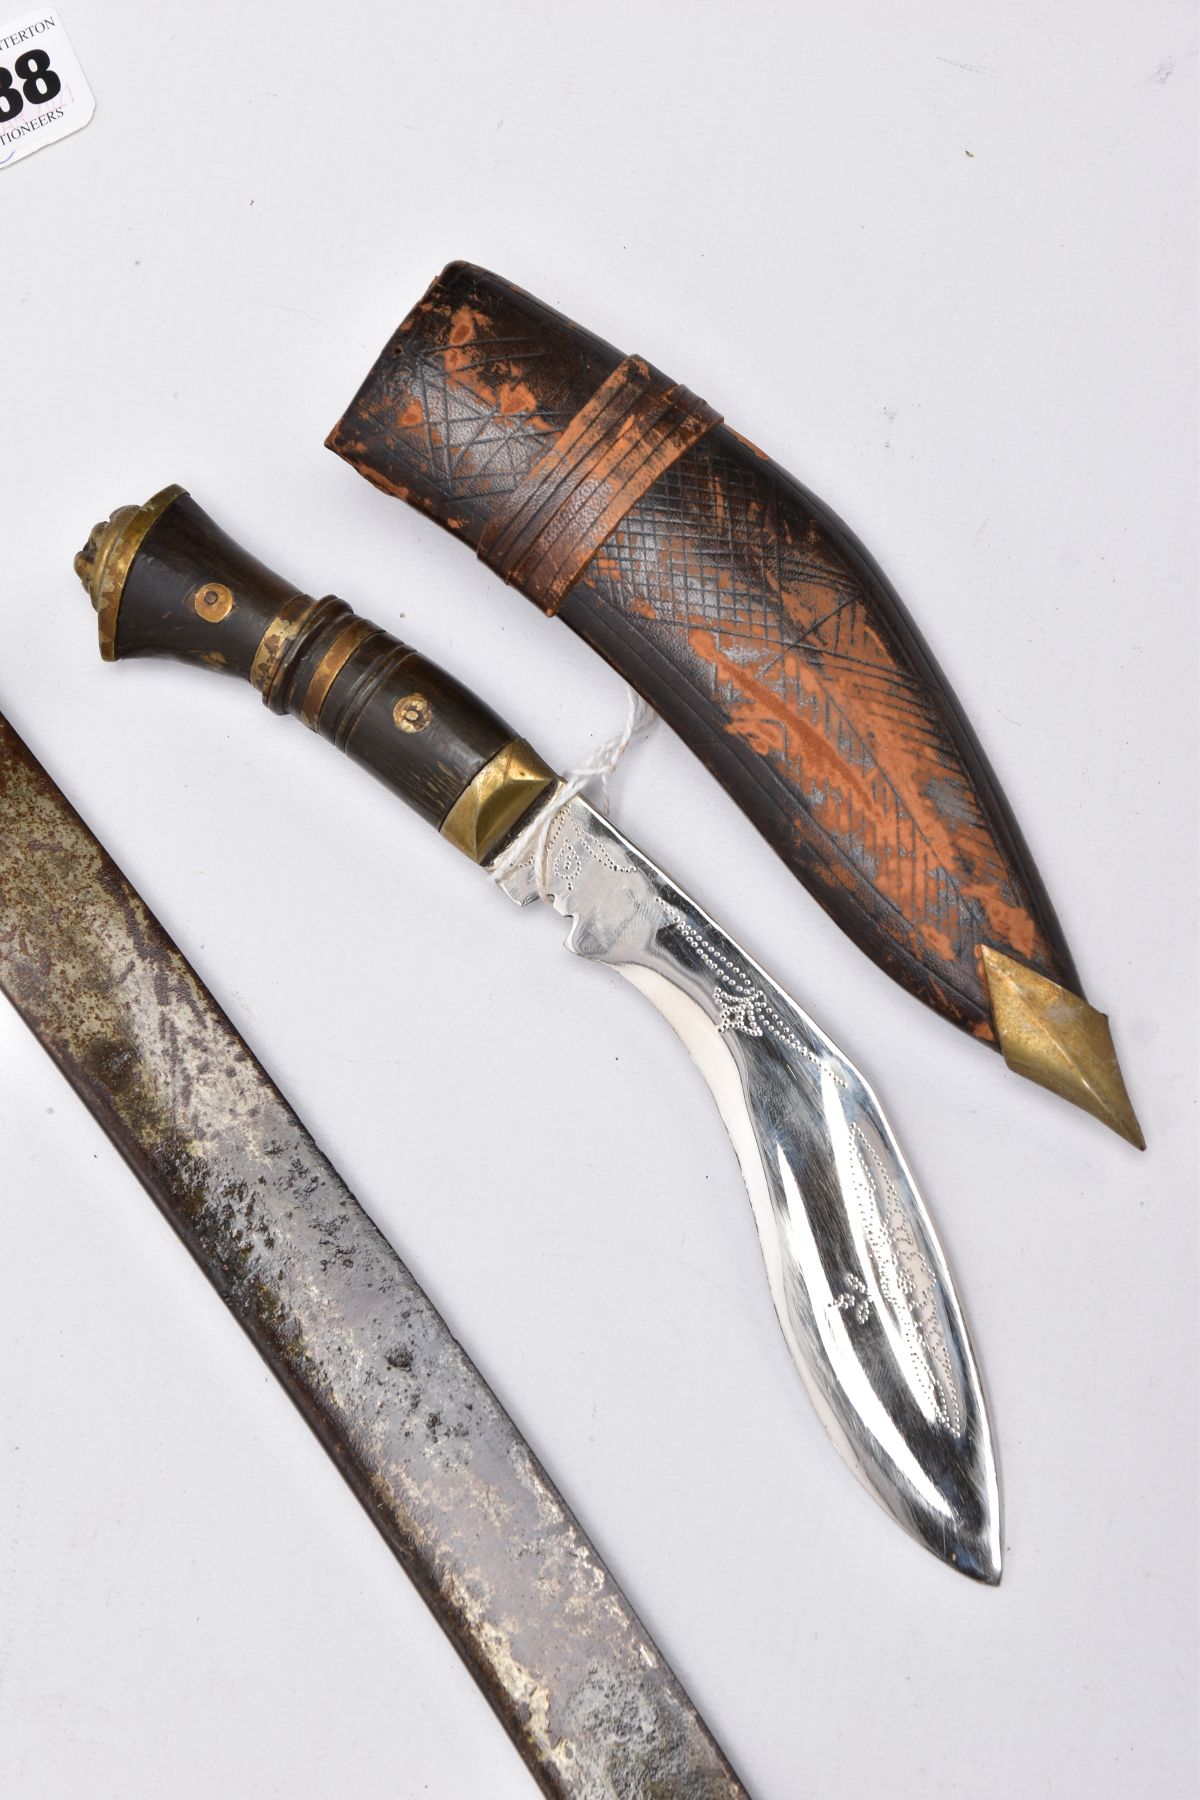 TWO LONG CURVED BLADE SWORDS, Eastern in design and looks, blade on one has been lacquered, etched - Image 2 of 10